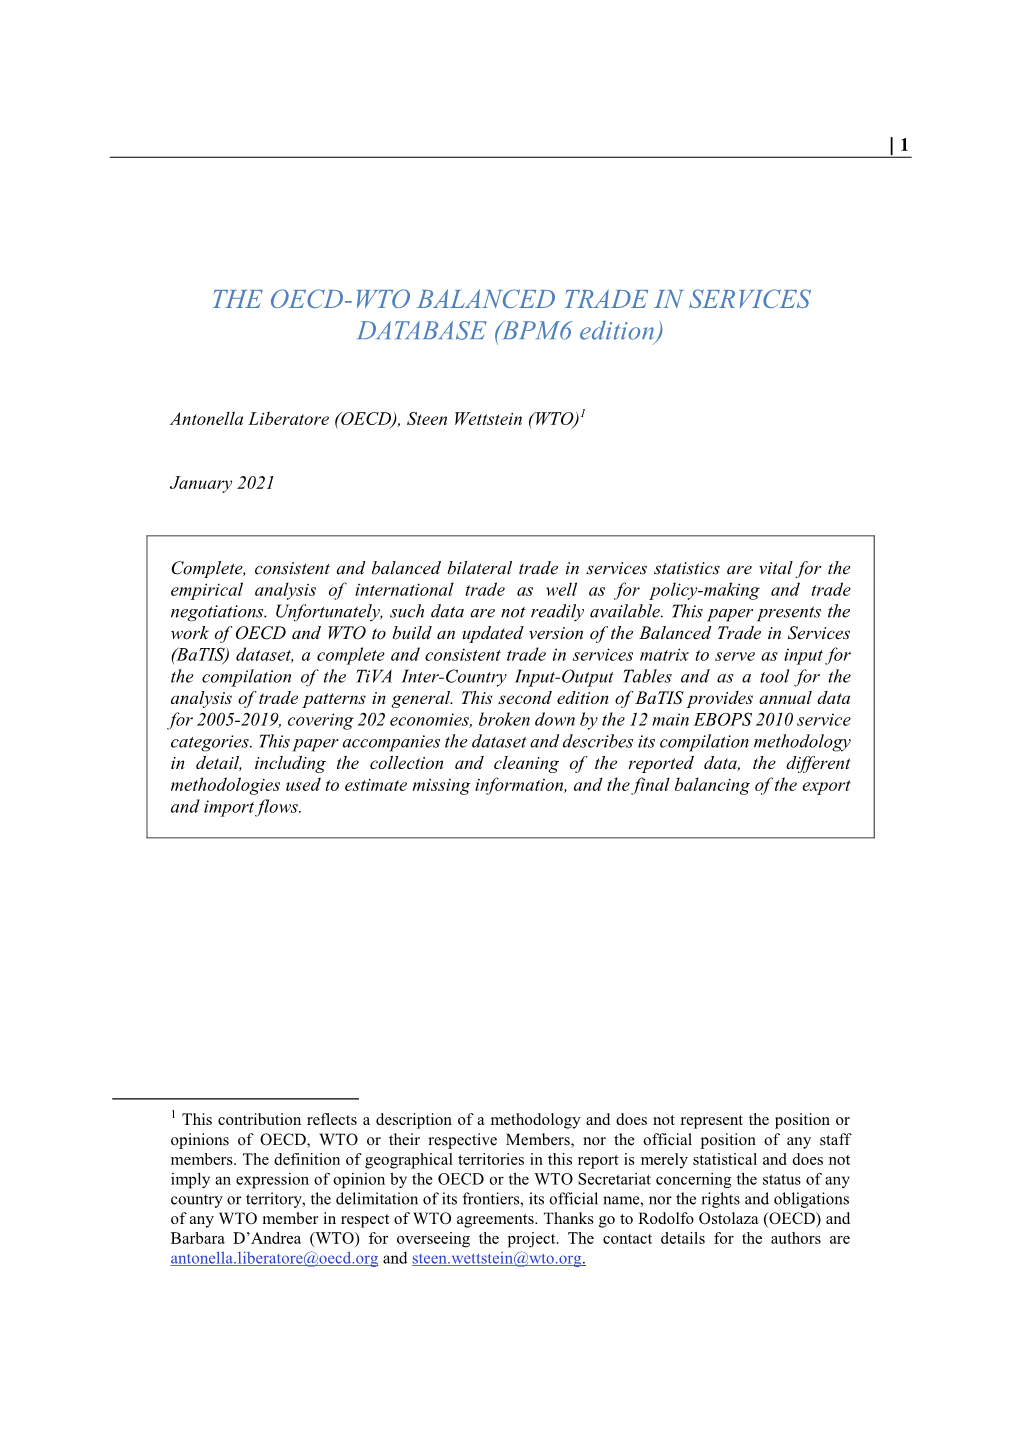 THE OECD-WTO BALANCED TRADE in SERVICES DATABASE (BPM6 Edition)